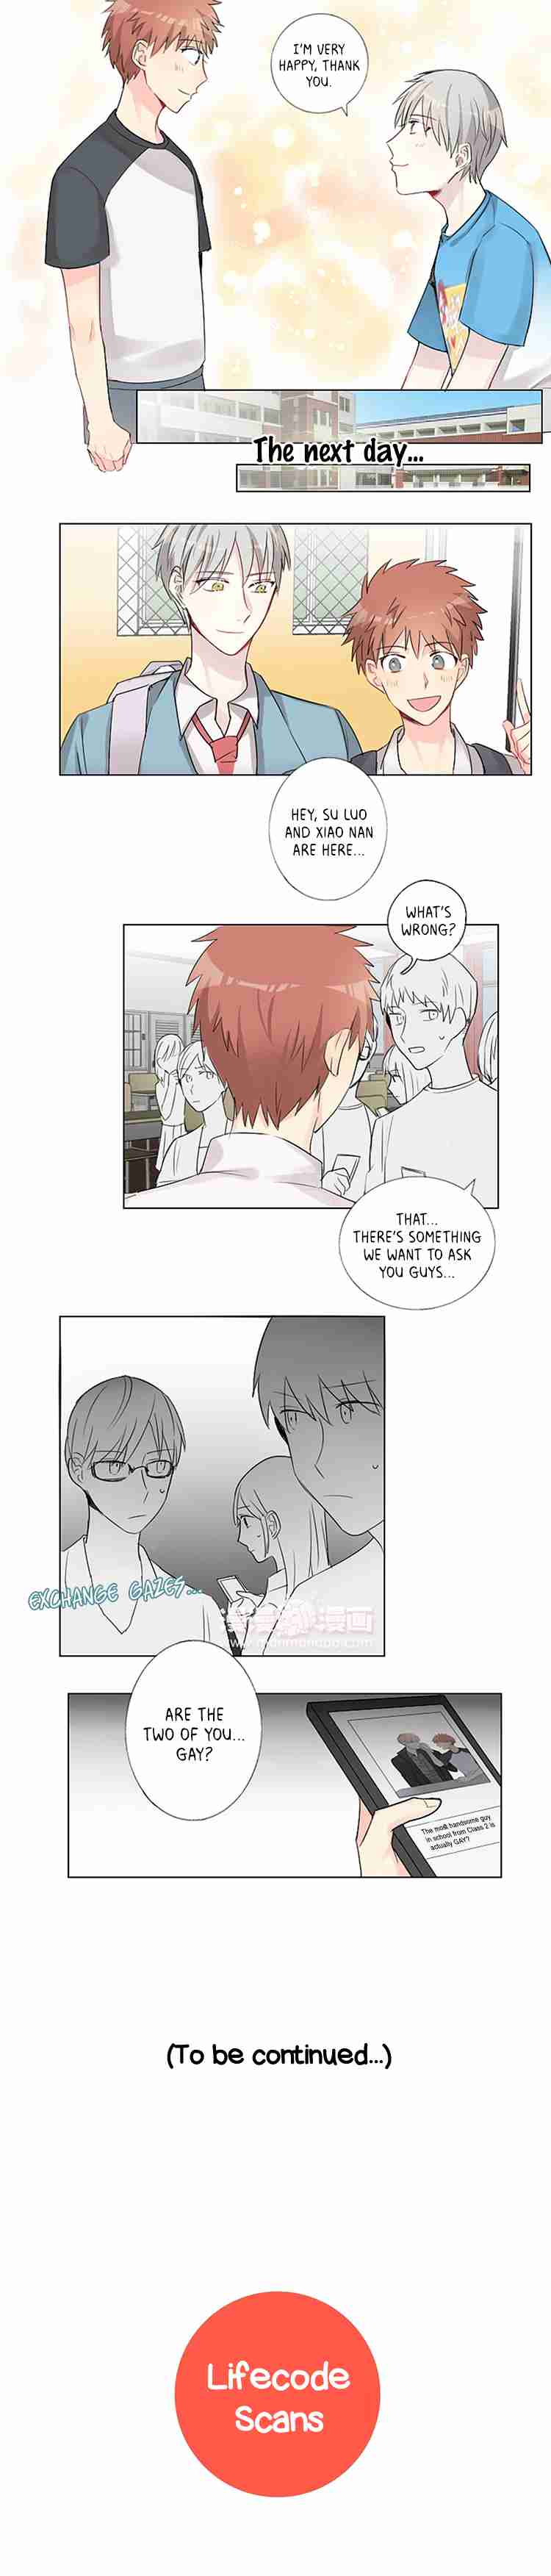 A Pair of Otakus Ch. 9 Dating, this kind of thing